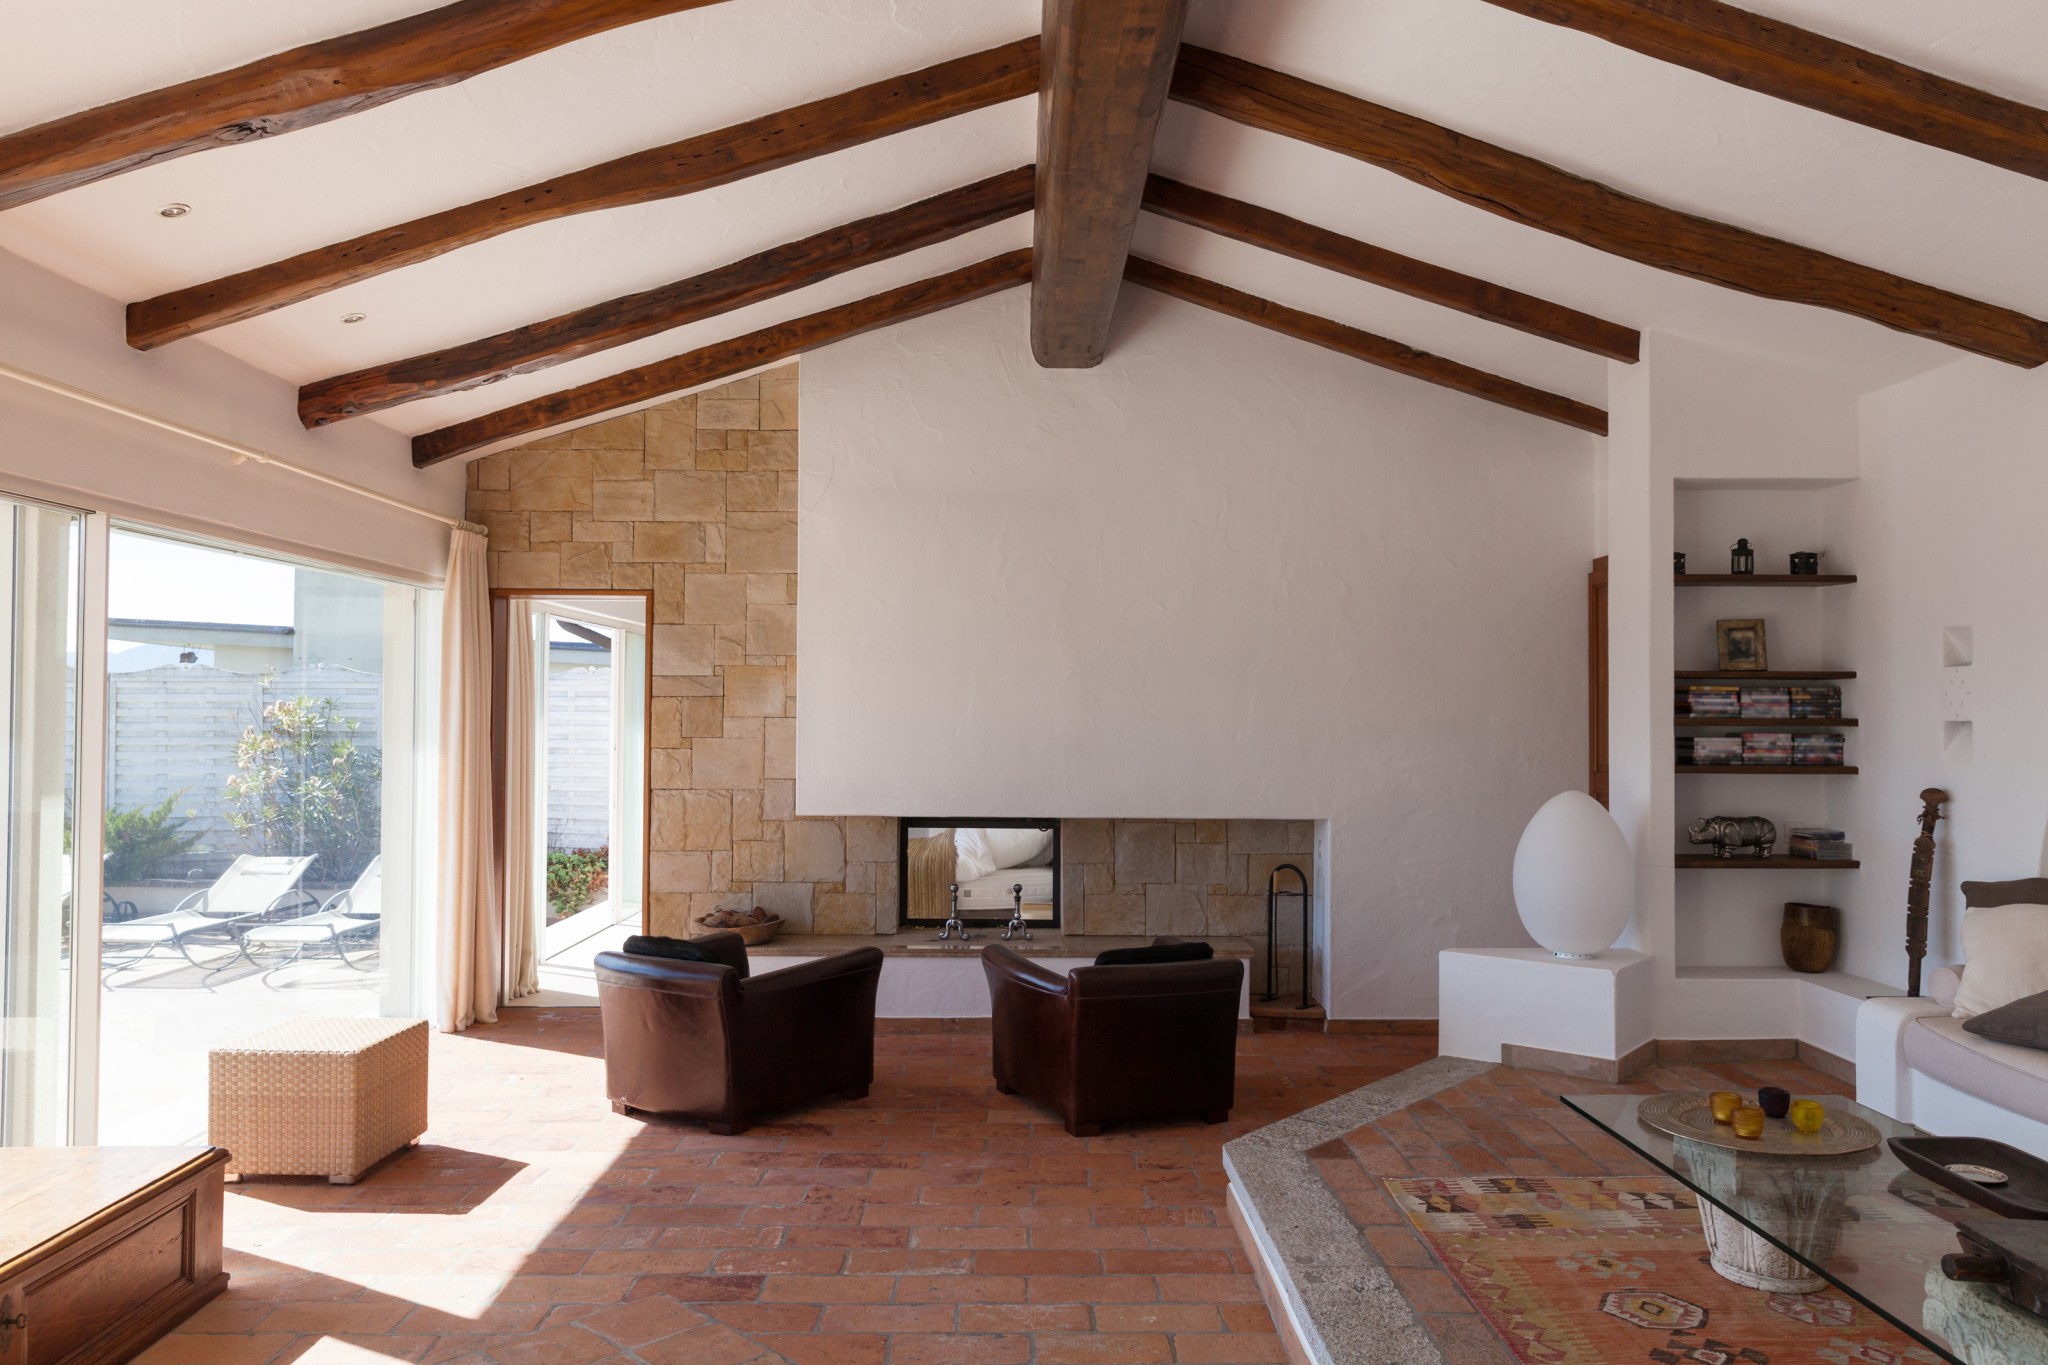 Vaulted ceiling in a living room with exposed wood beams